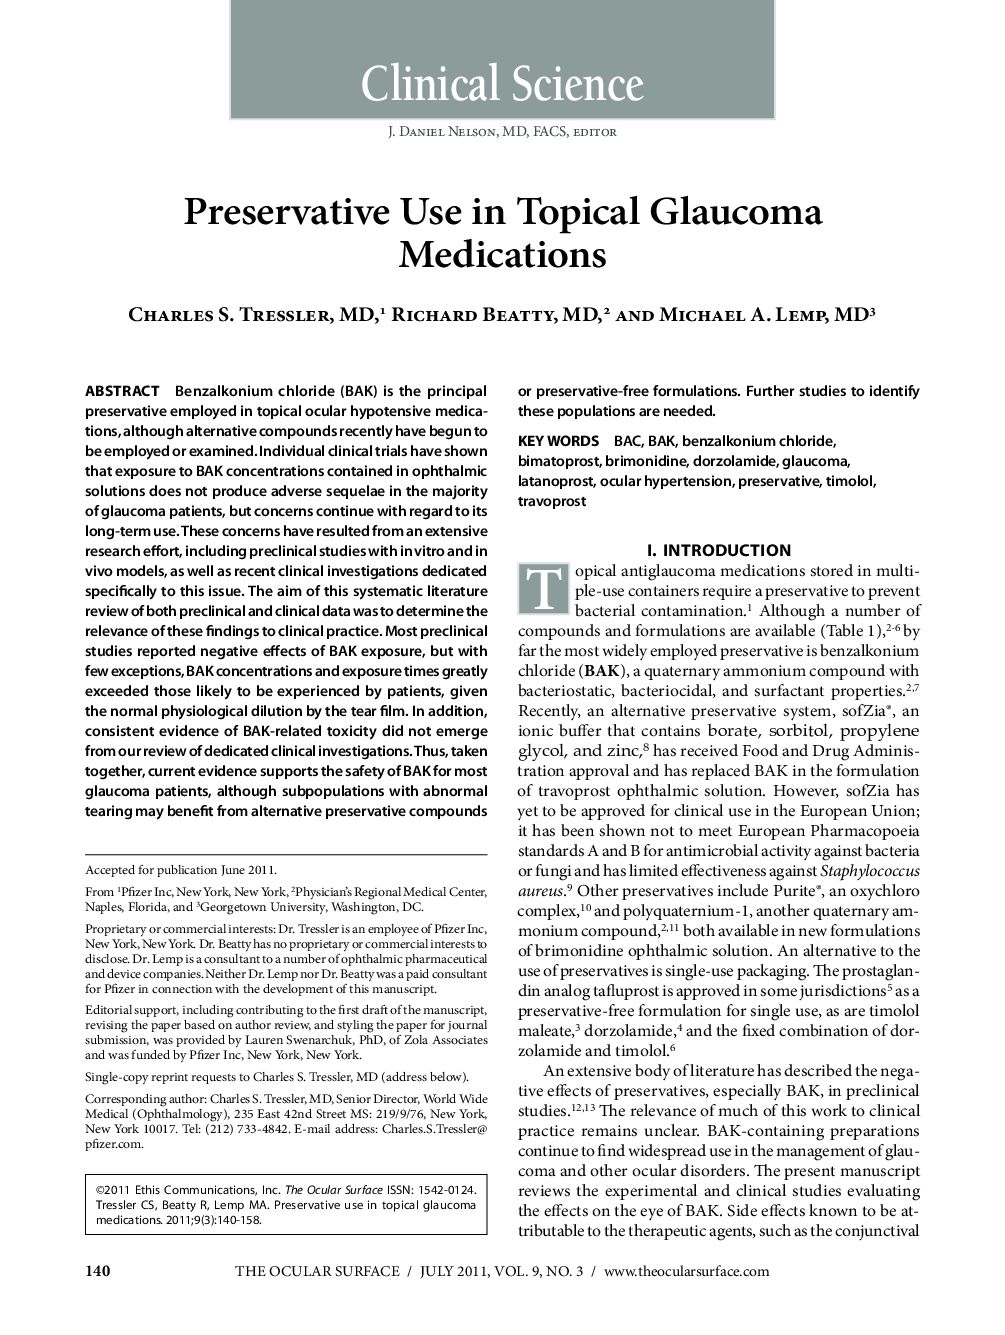 Preservative Use in Topical Glaucoma Medications 